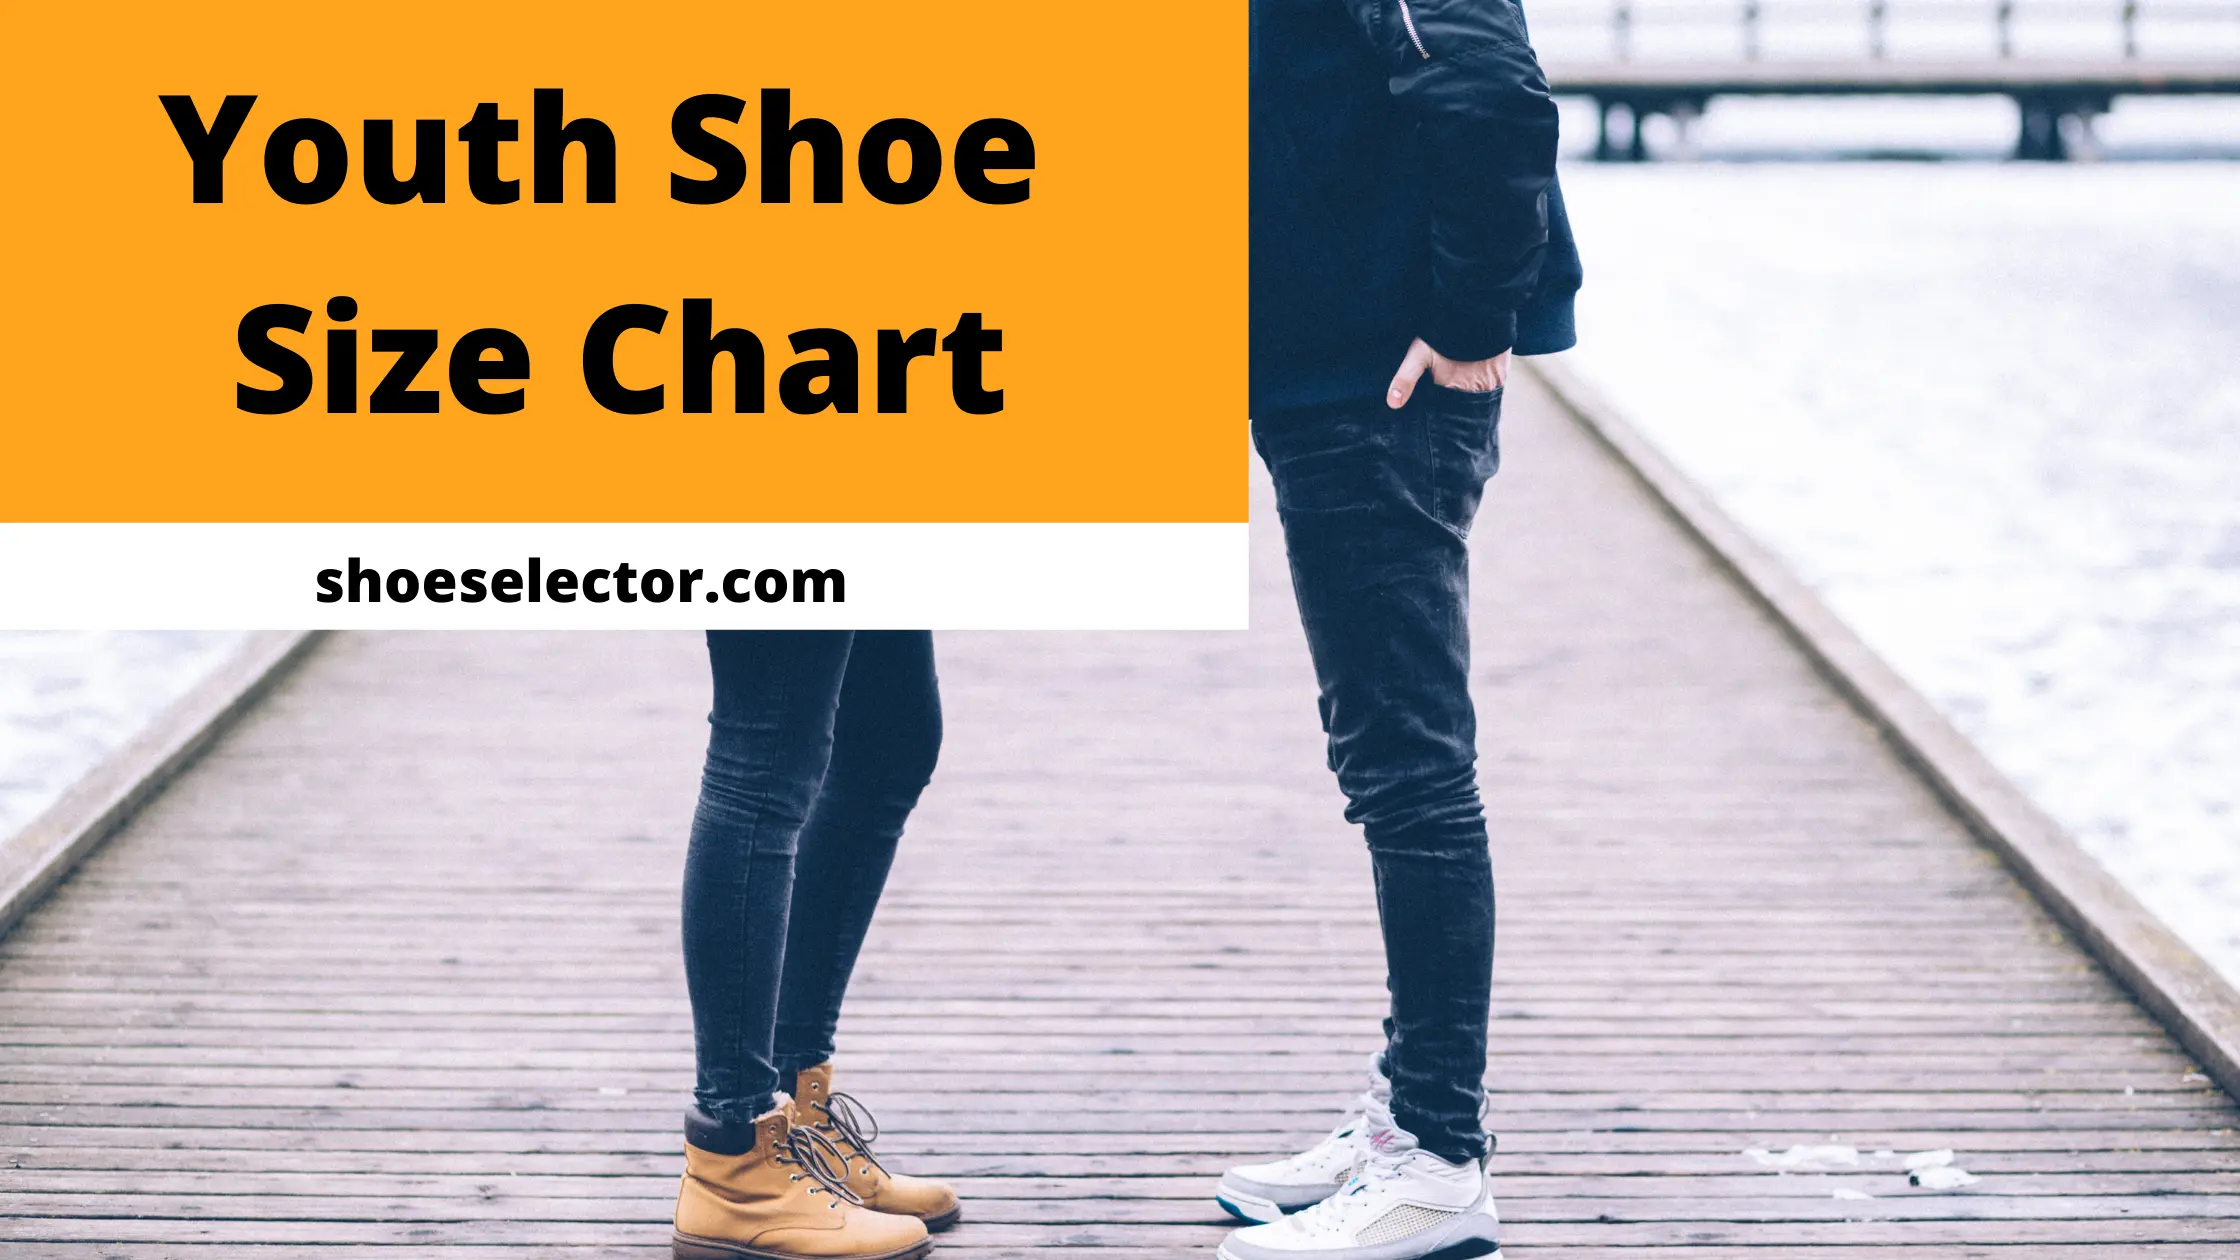 Youth Shoe Size Chart - Finding The Best Fit For Youth